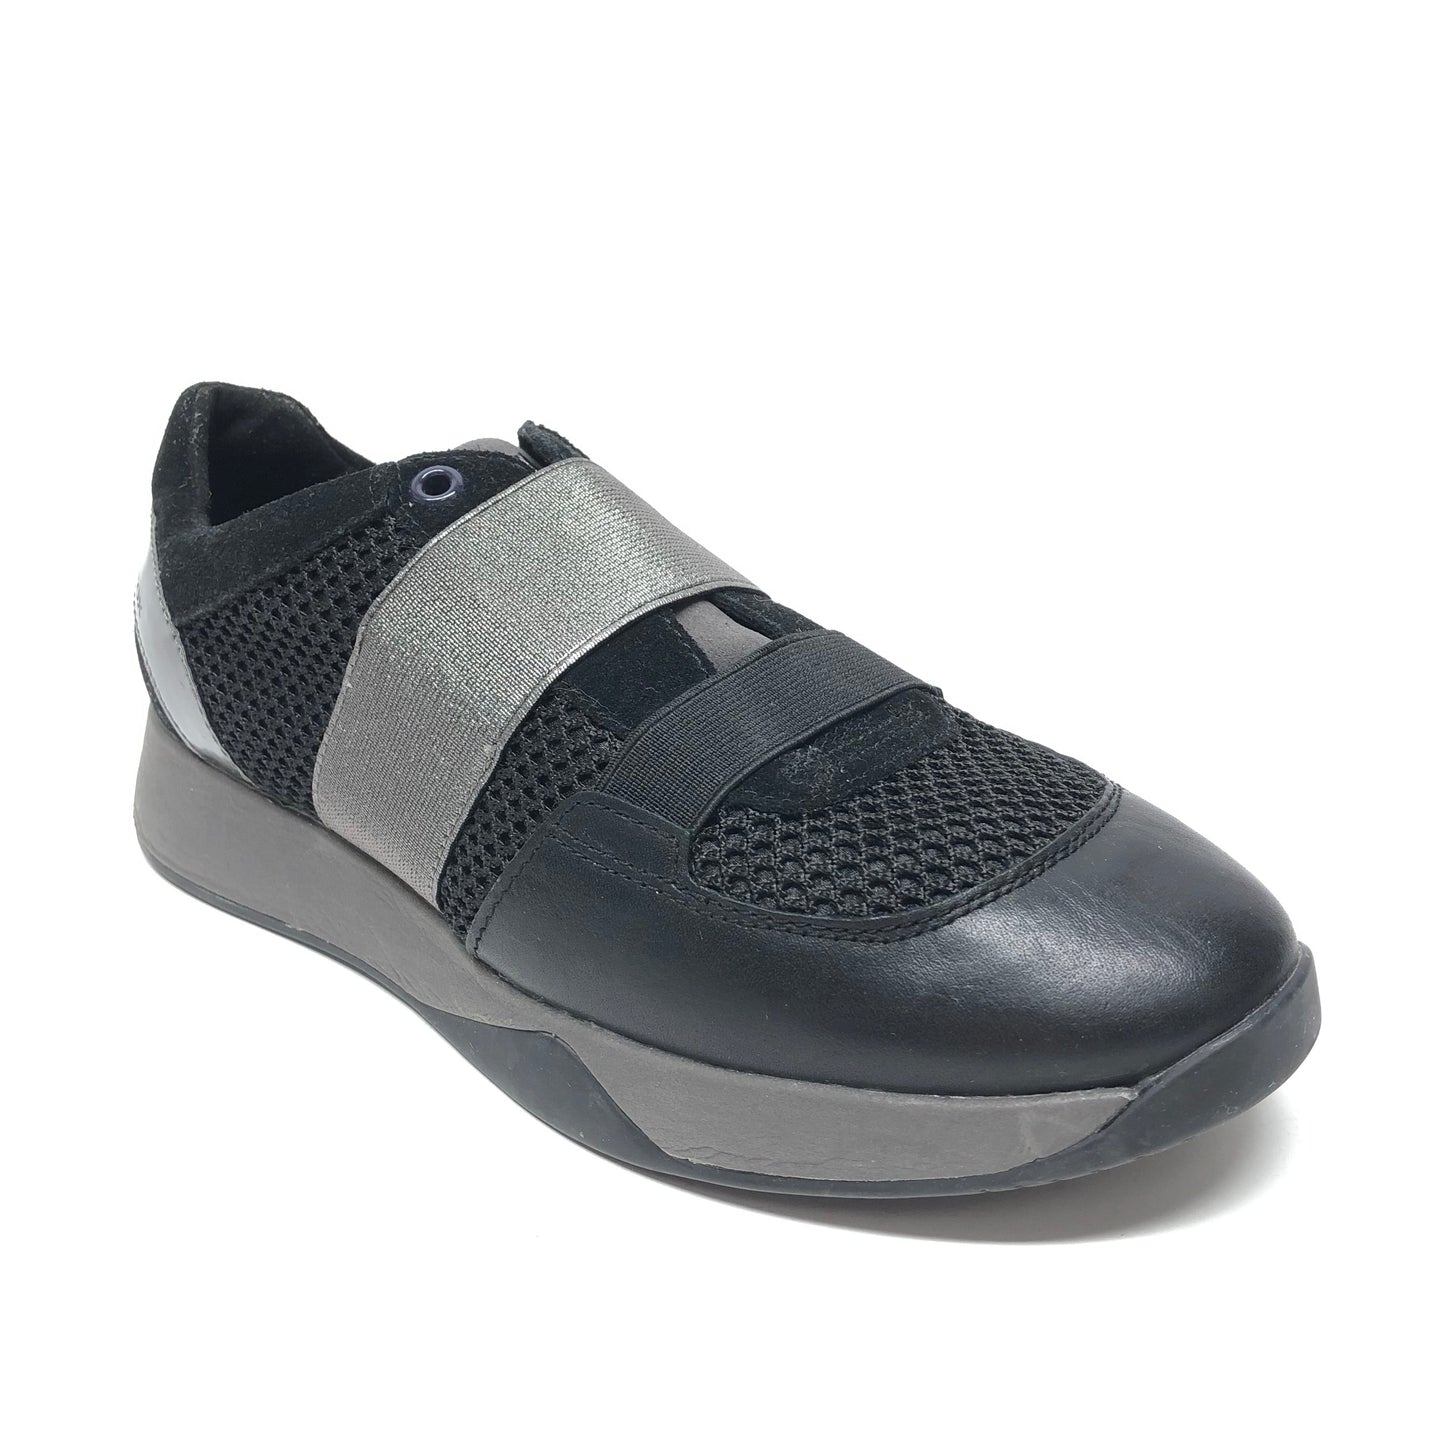 Black Shoes Sneakers Geox Shoes, Size 9